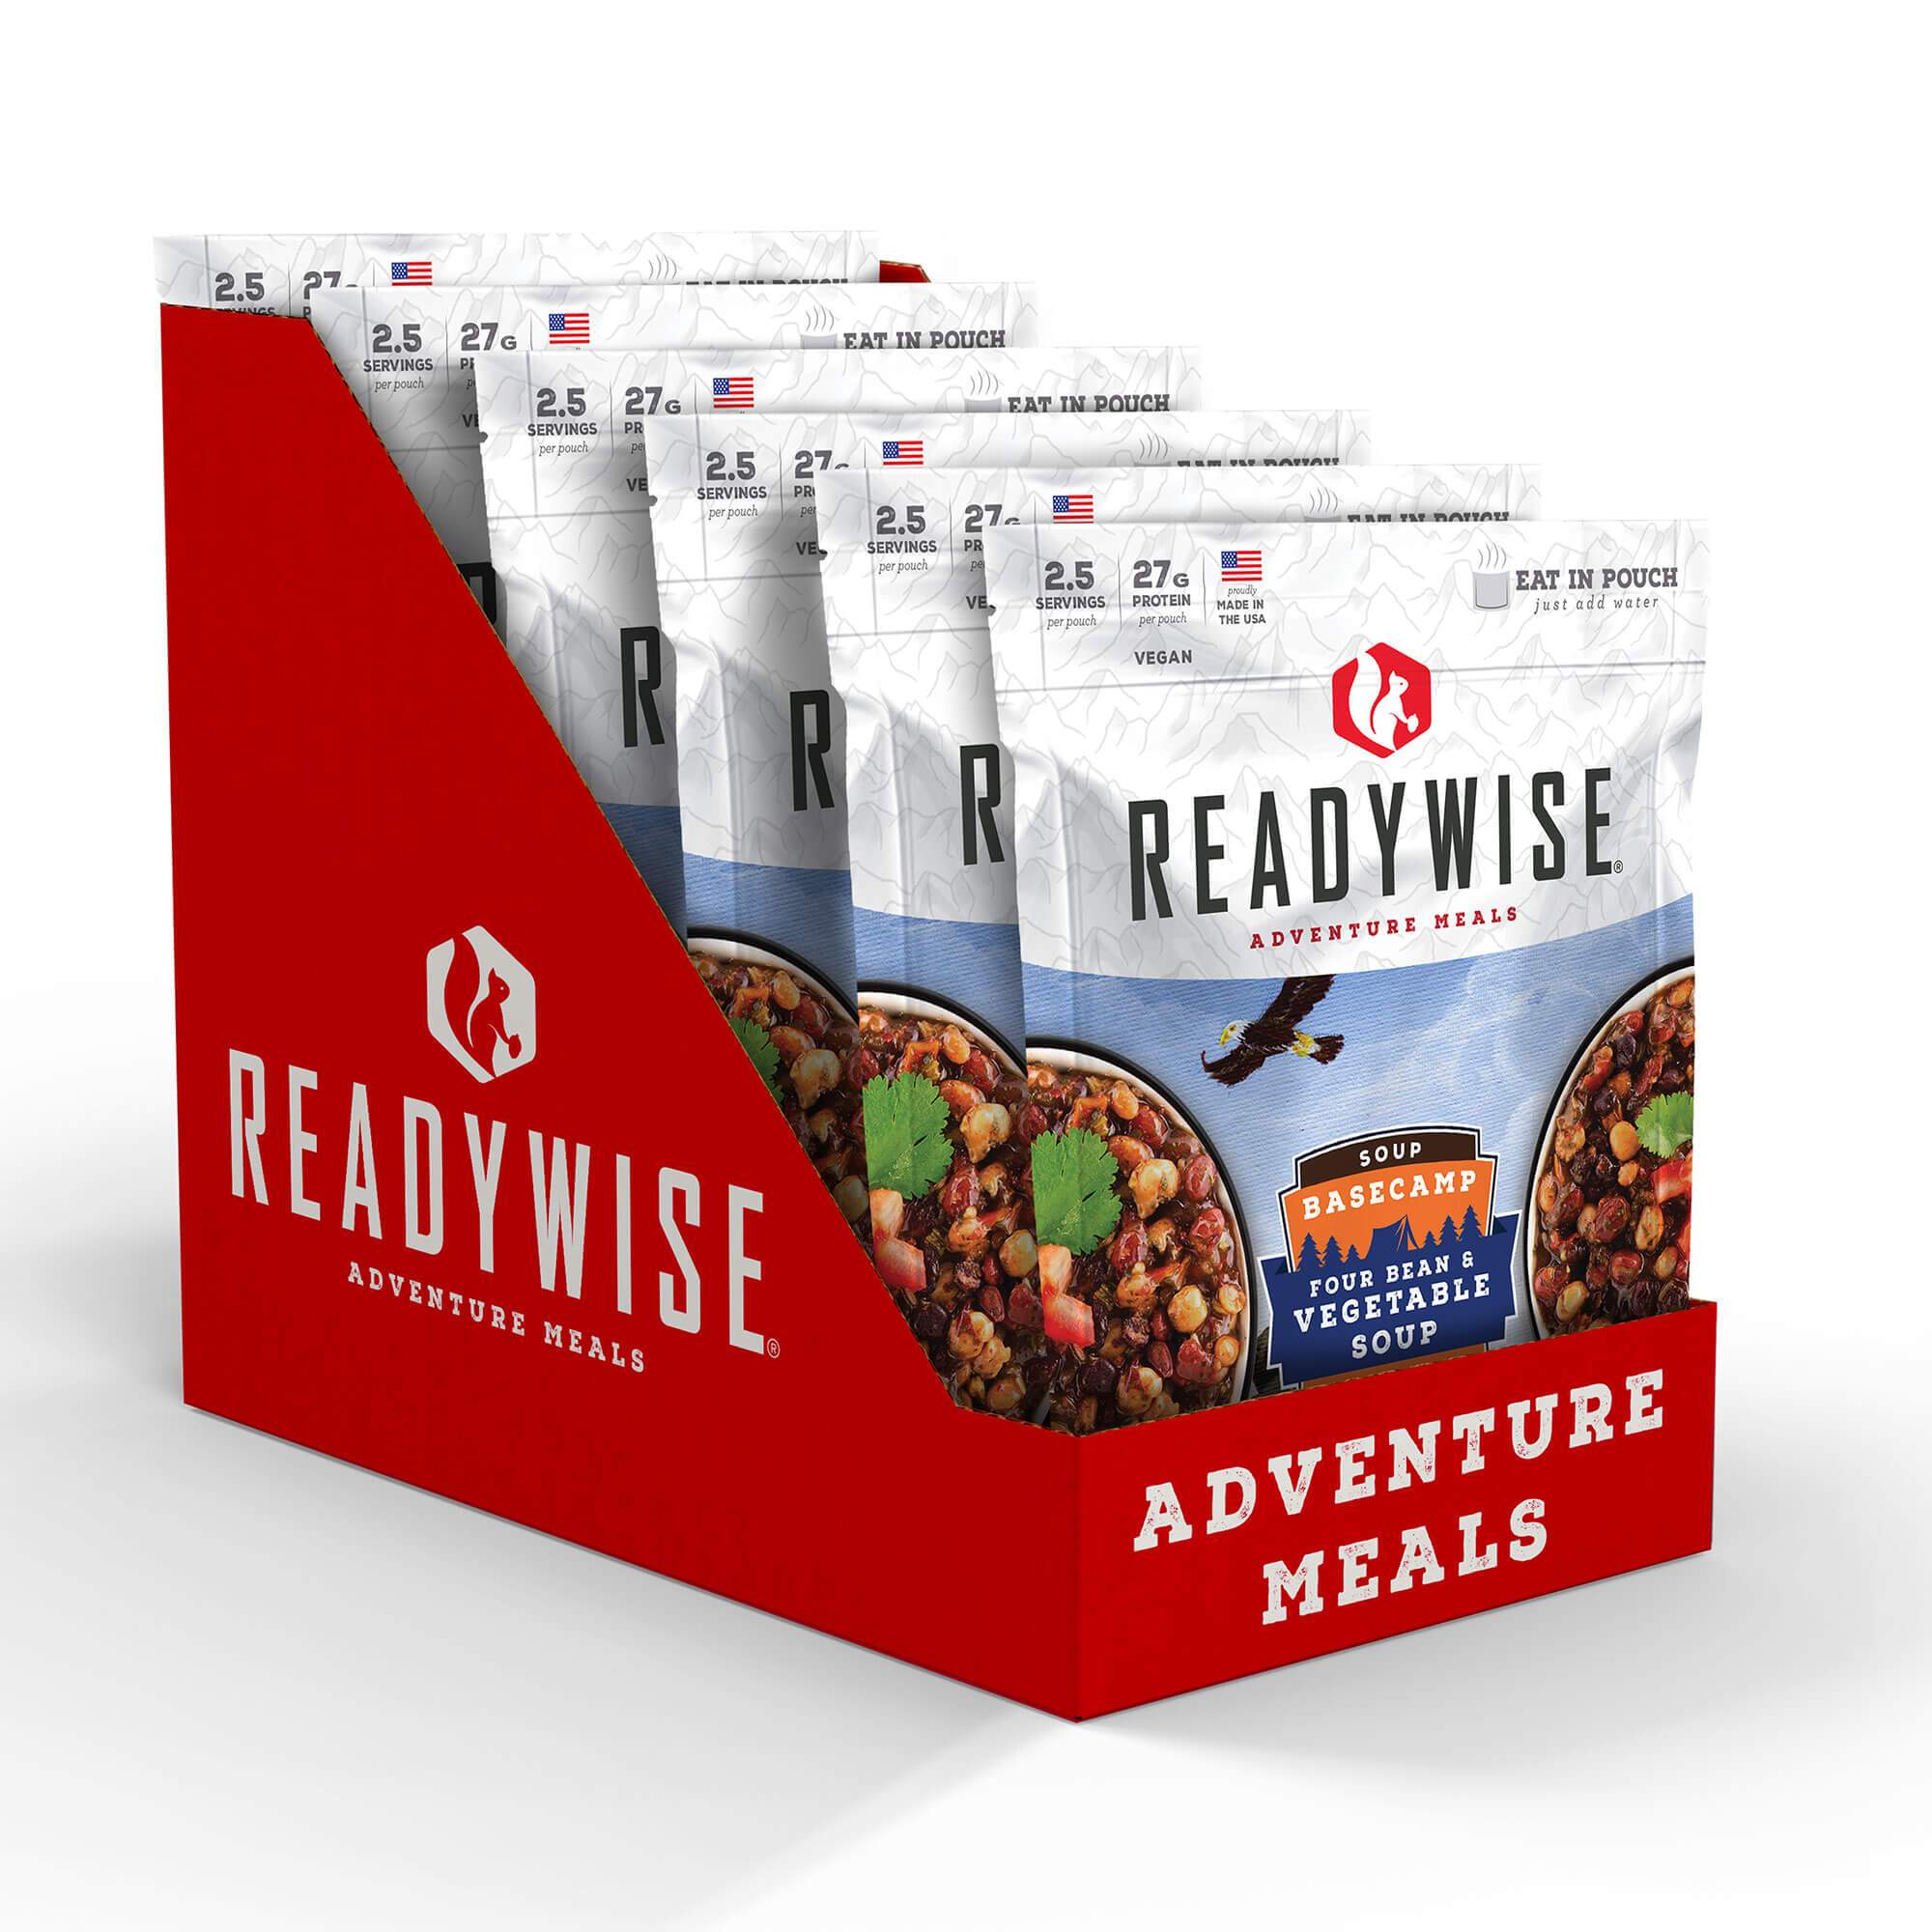 A box of ReadyWise Basecamp Four Bean and Vegetable Soup - 6 Pack (SHIPS IN 1-2 WEEKS) adventure meals.